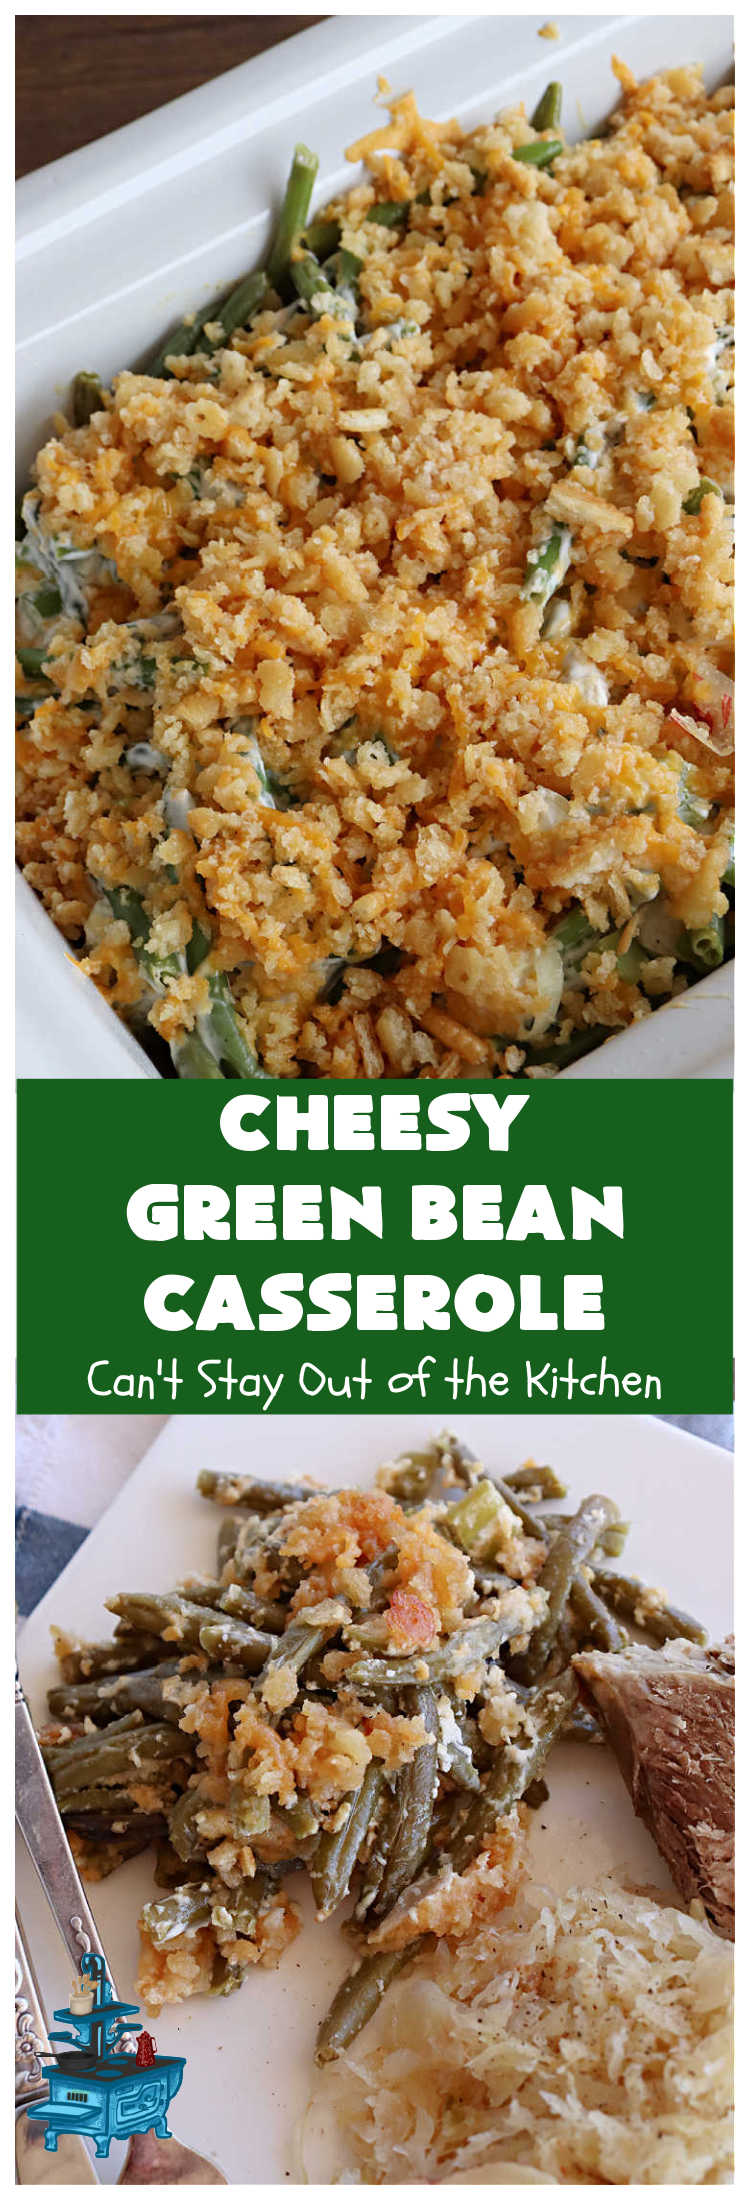 Cheesy Green Bean Casserole | Can't Stay Out of the Kitchen | this is NOT the typical #GreenBeanCasserole #recipe everyone makes for the #holidays. It's SO much better! This one has a #RitzCracker & #CheddarCheese topping. This is one of our favorite ways to enjoy #GreenBeans. Great for #MothersDay or #FathersDay. #CheesyGreenBeanCasserole